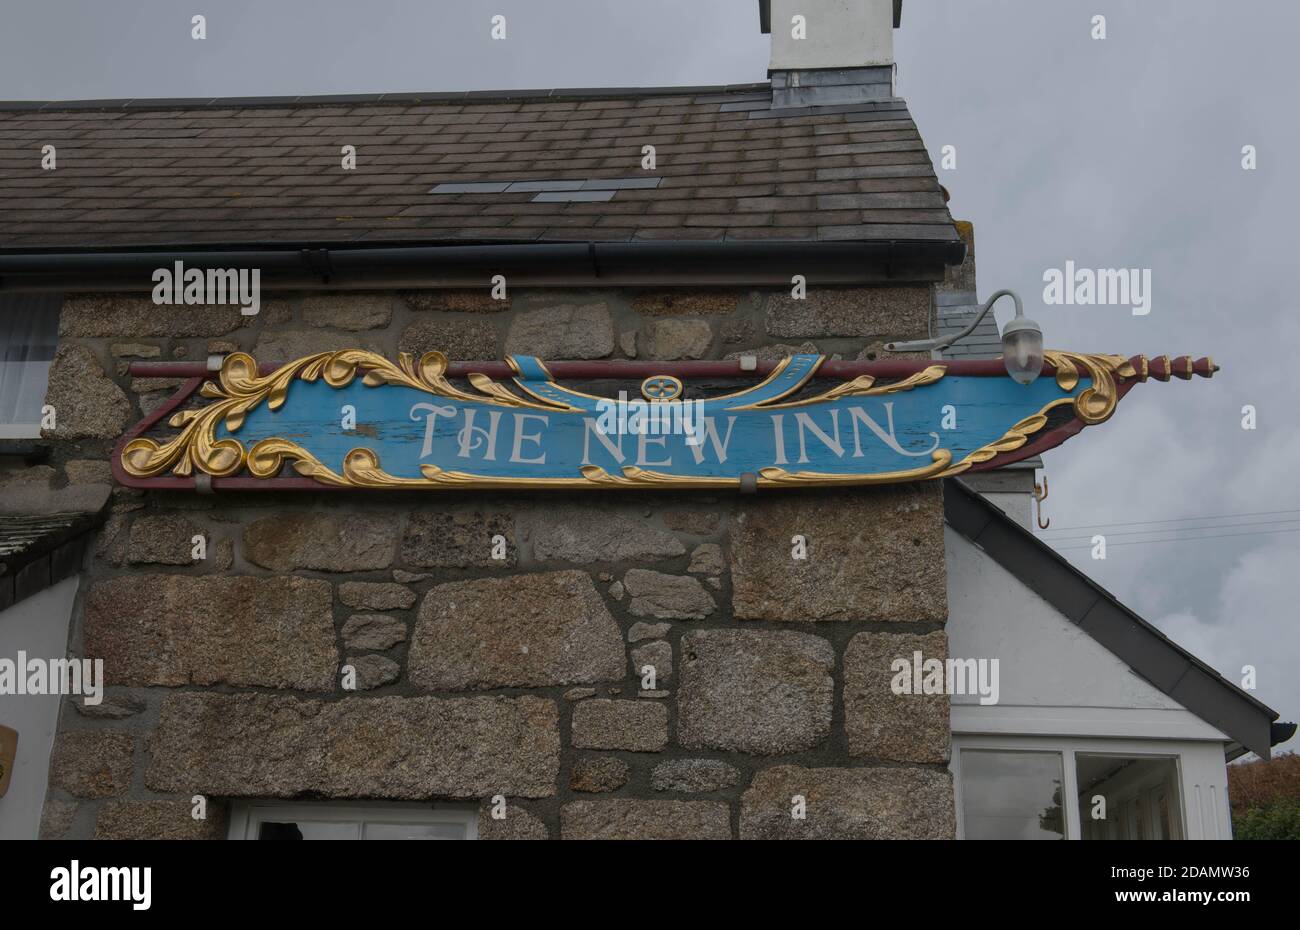 The New Inn Hotel and Pub Sign in the Harbour of New Grimsby on the Island of Tresco in the Isles of Scilly, England, UK Stock Photo